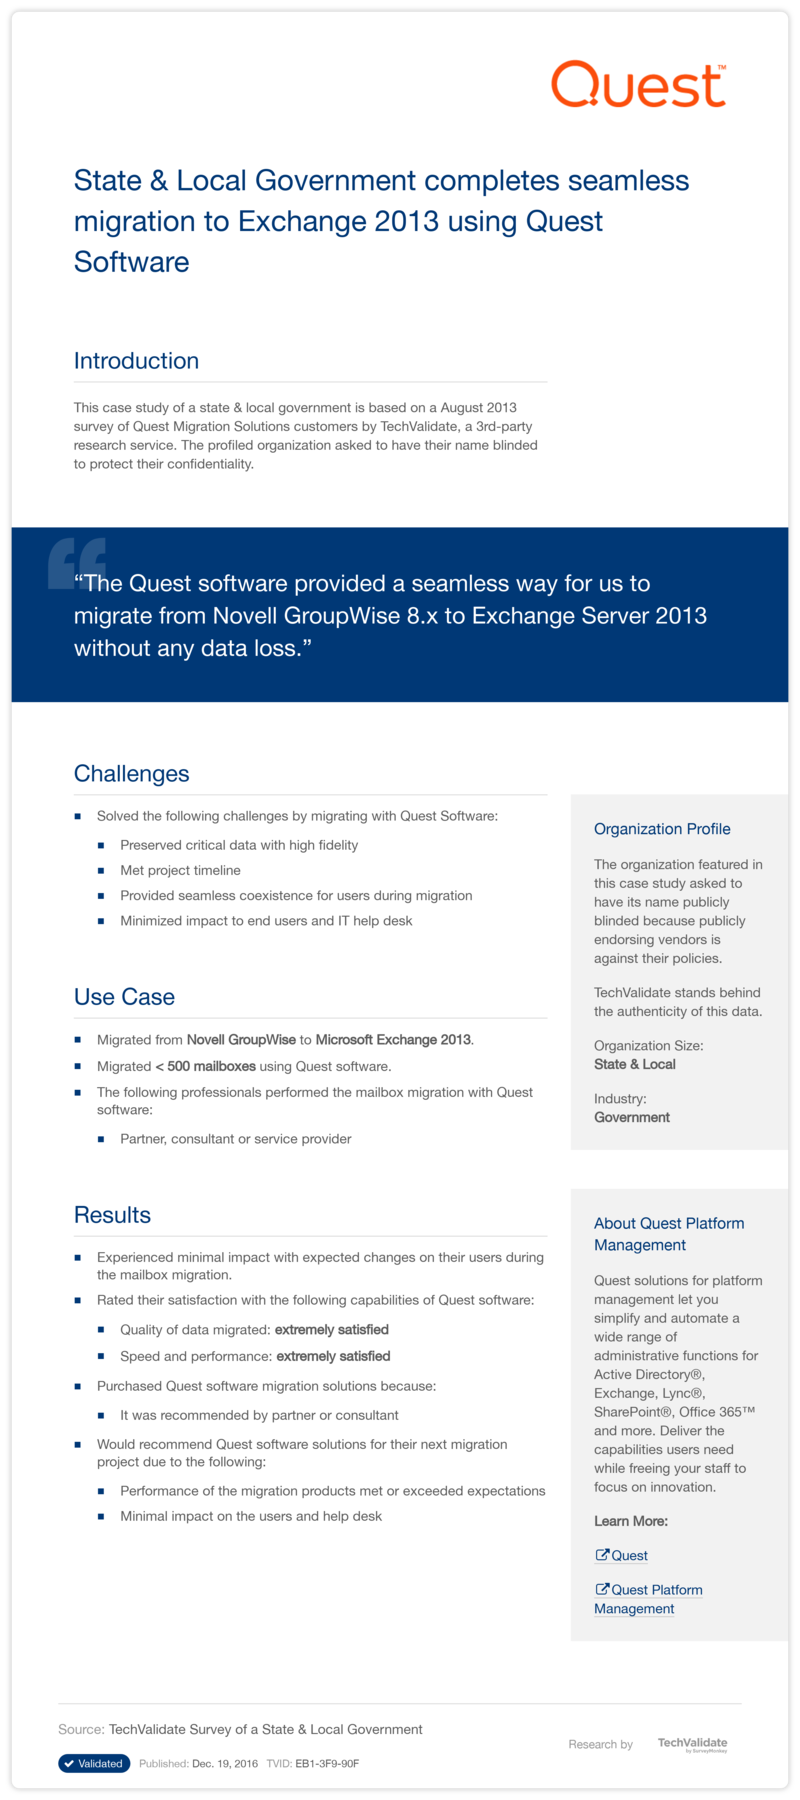 State & Local Government completes seamless migration to Exchange 2013 using Quest Software